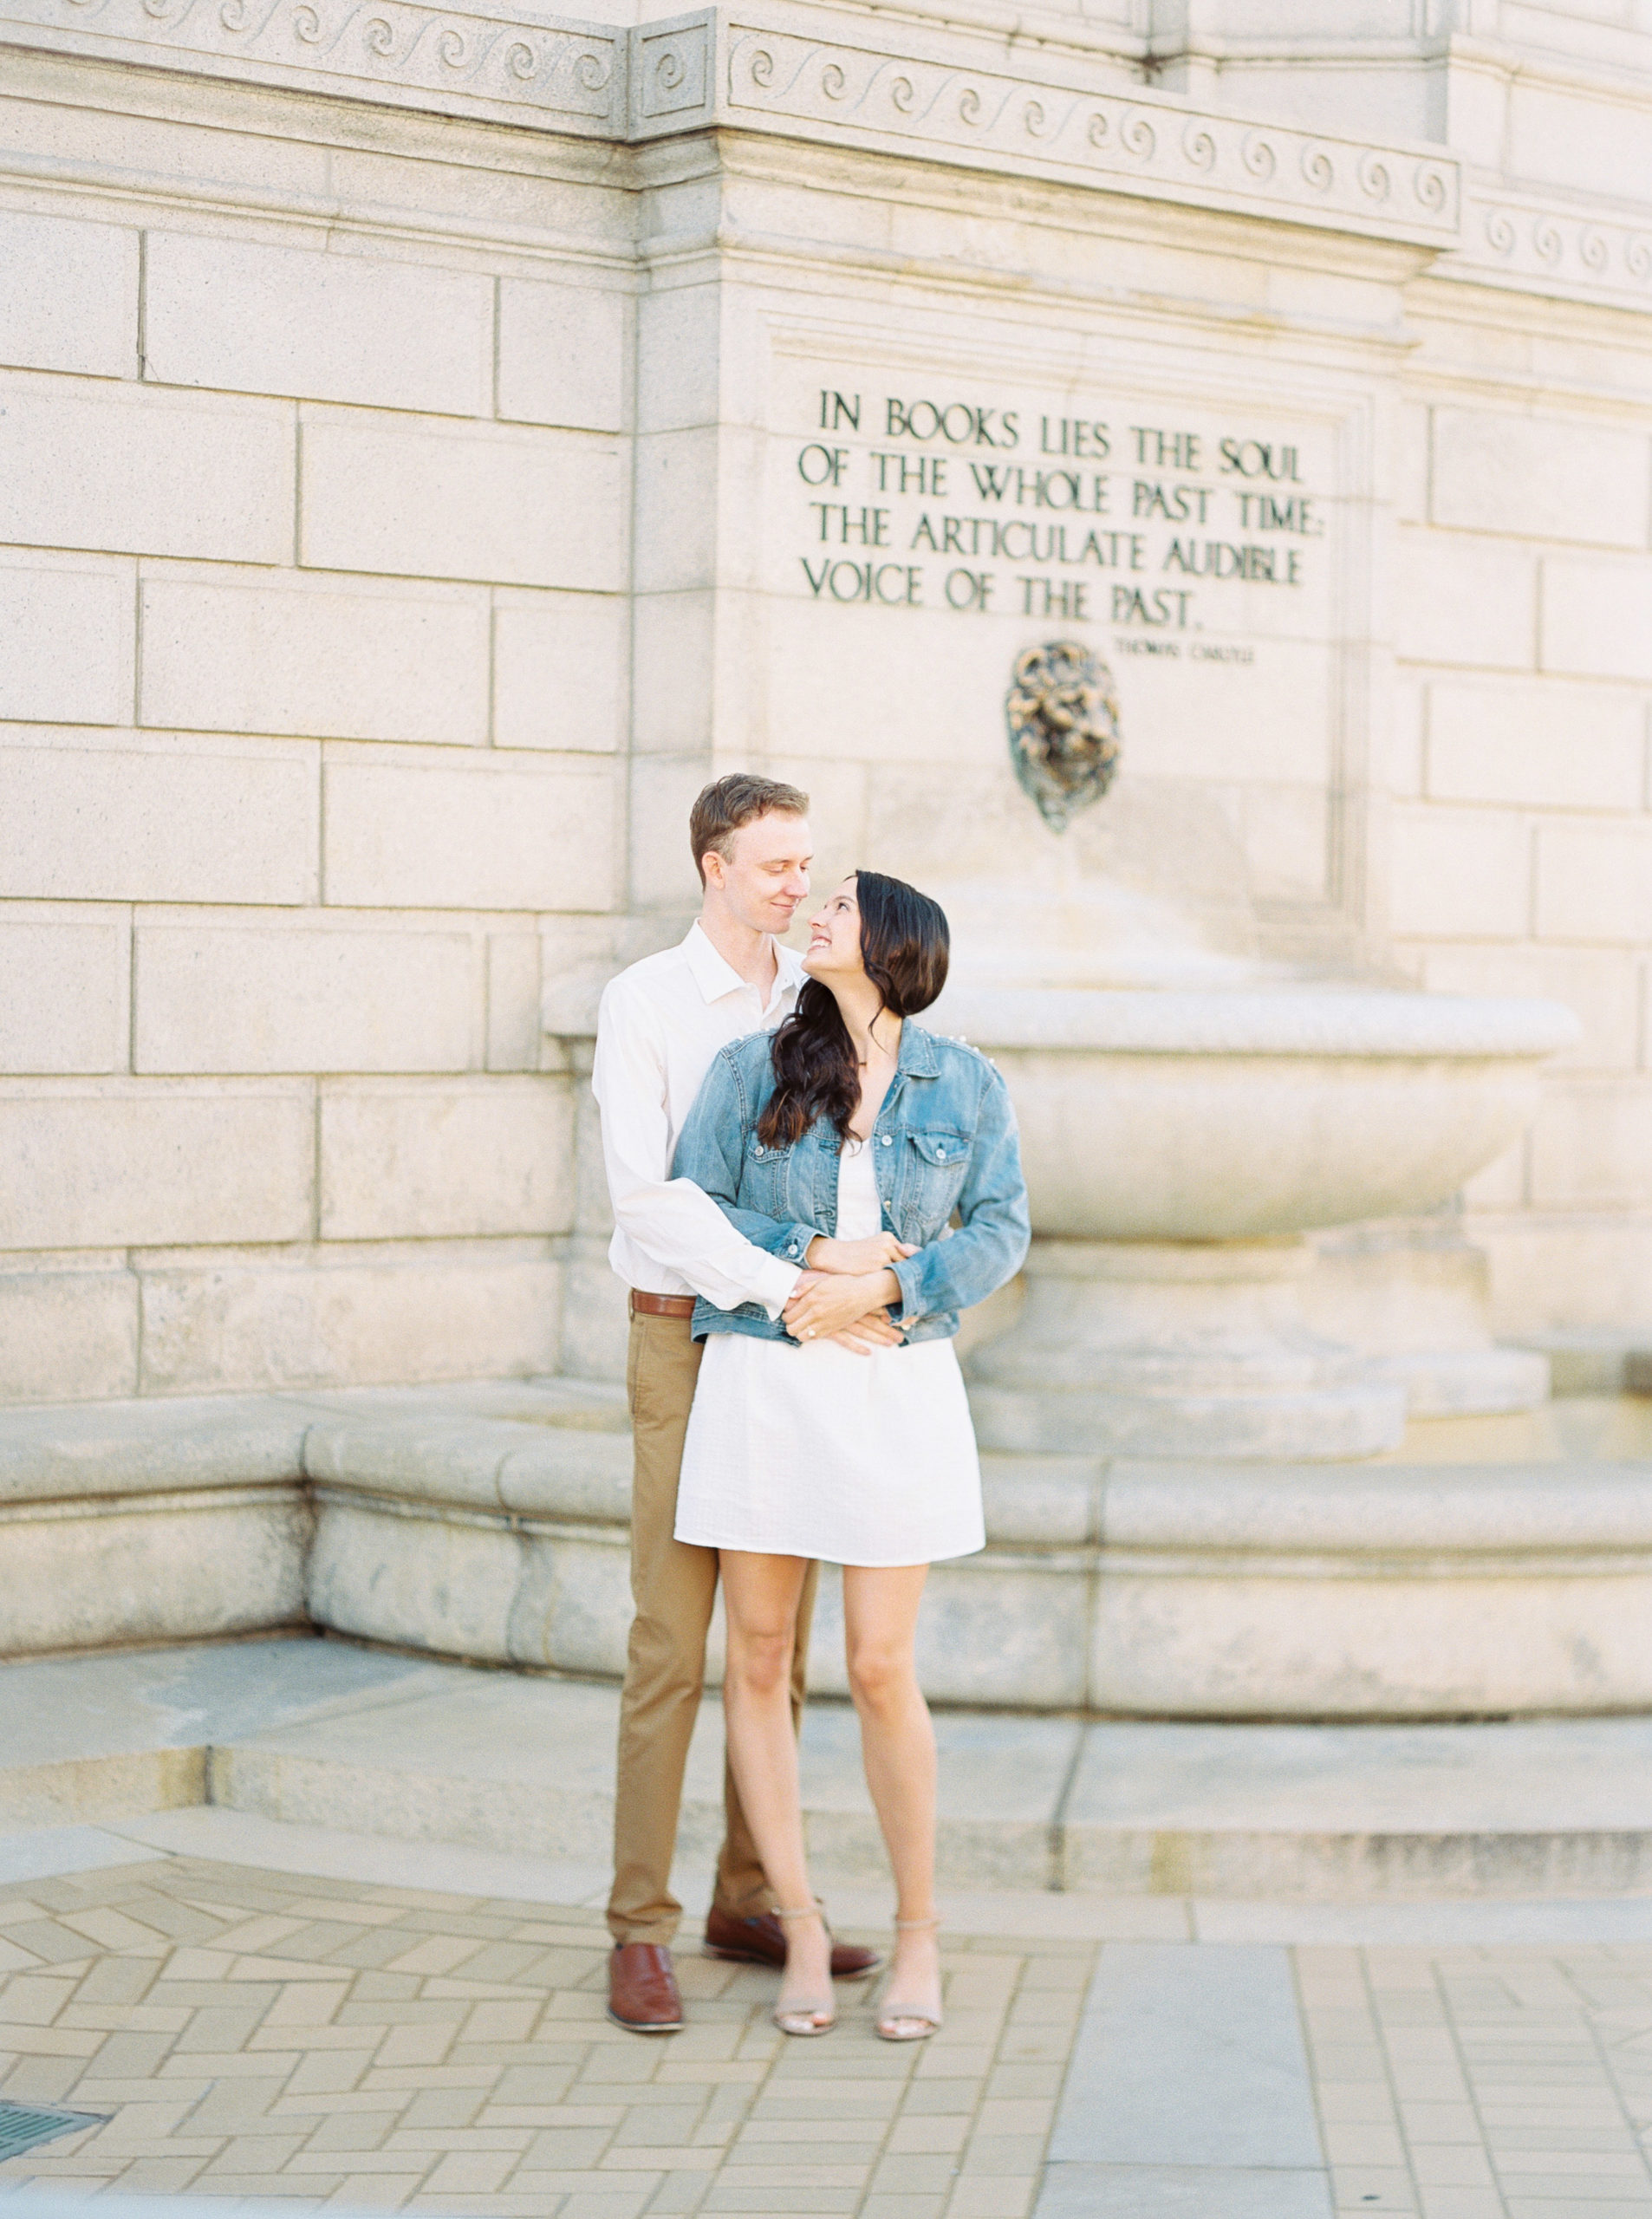 St Louis Central Library and spring floral fine art engagement session on film